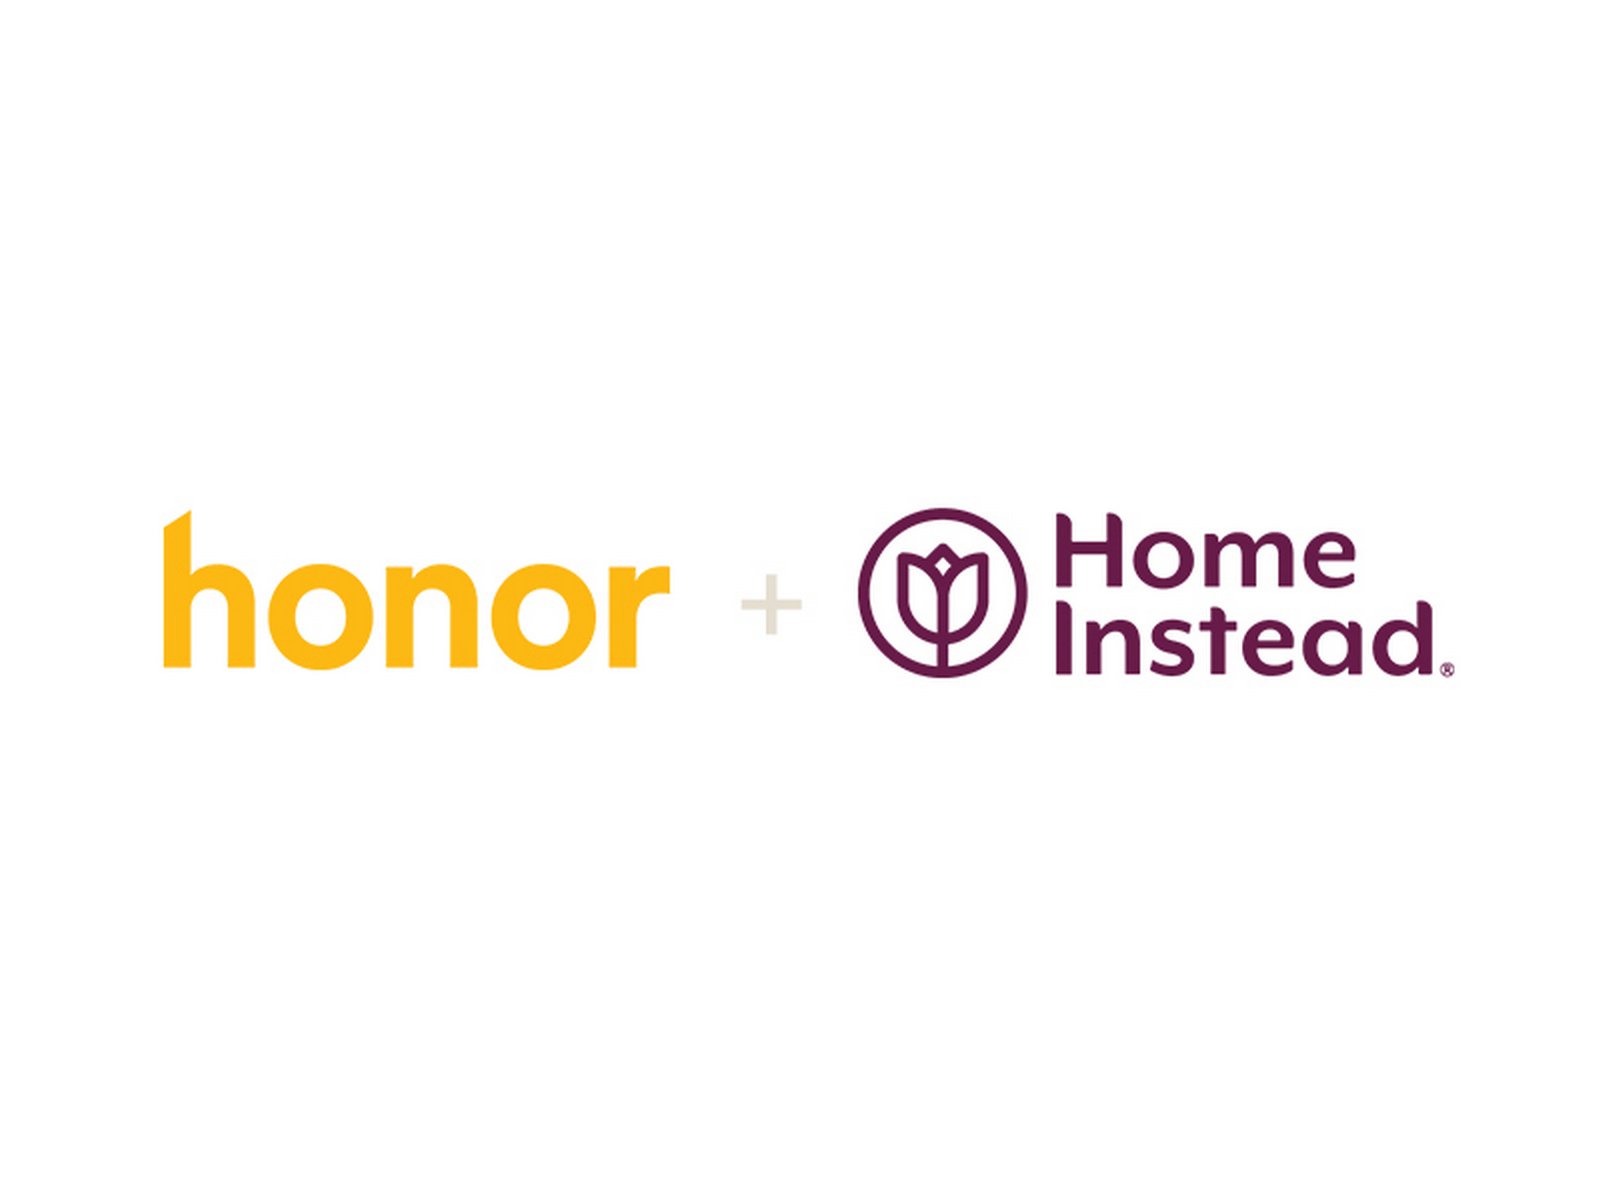 Logo for Honor, a plus sign and the Home Instead Logo